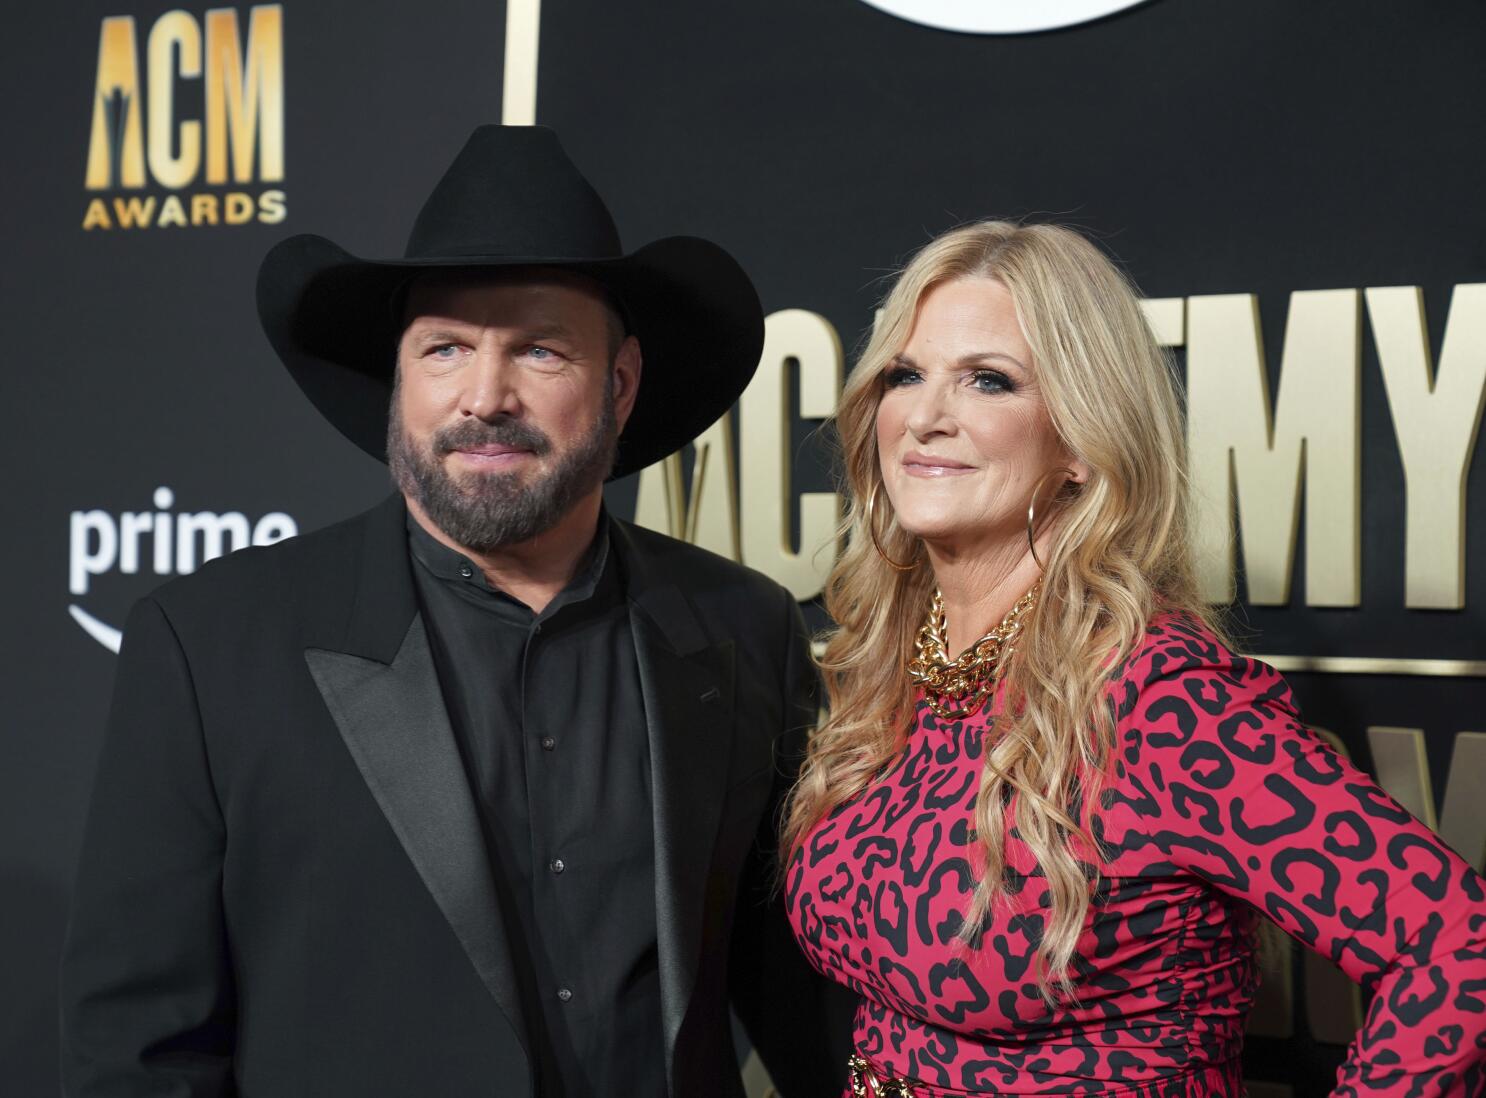 Garth Brooks Says 2023 Will Be The Busiest Year Of His Career